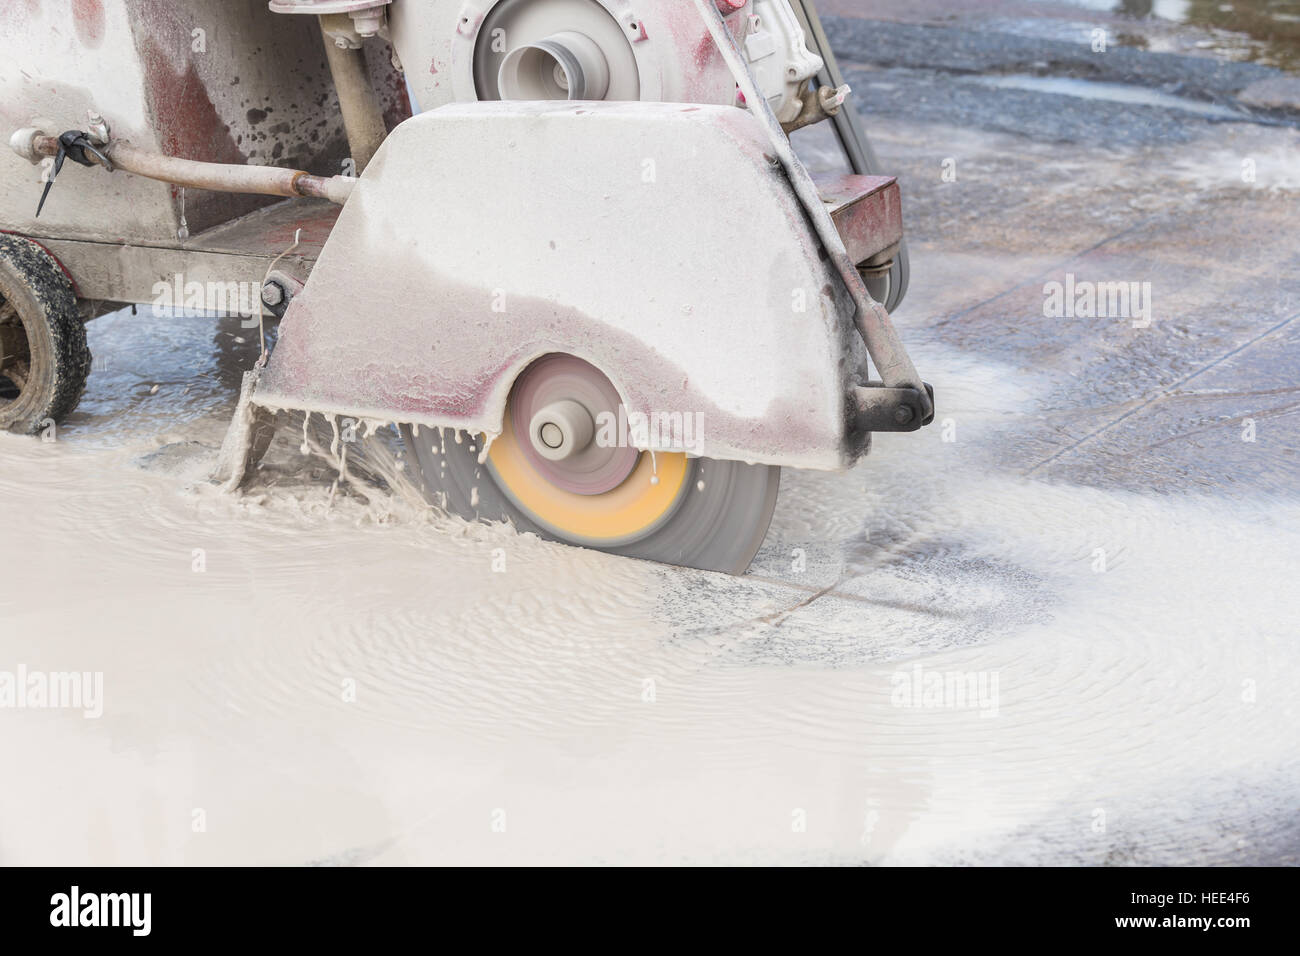 A worker cutting concrete road with diamond saw blade machine Stock Photo